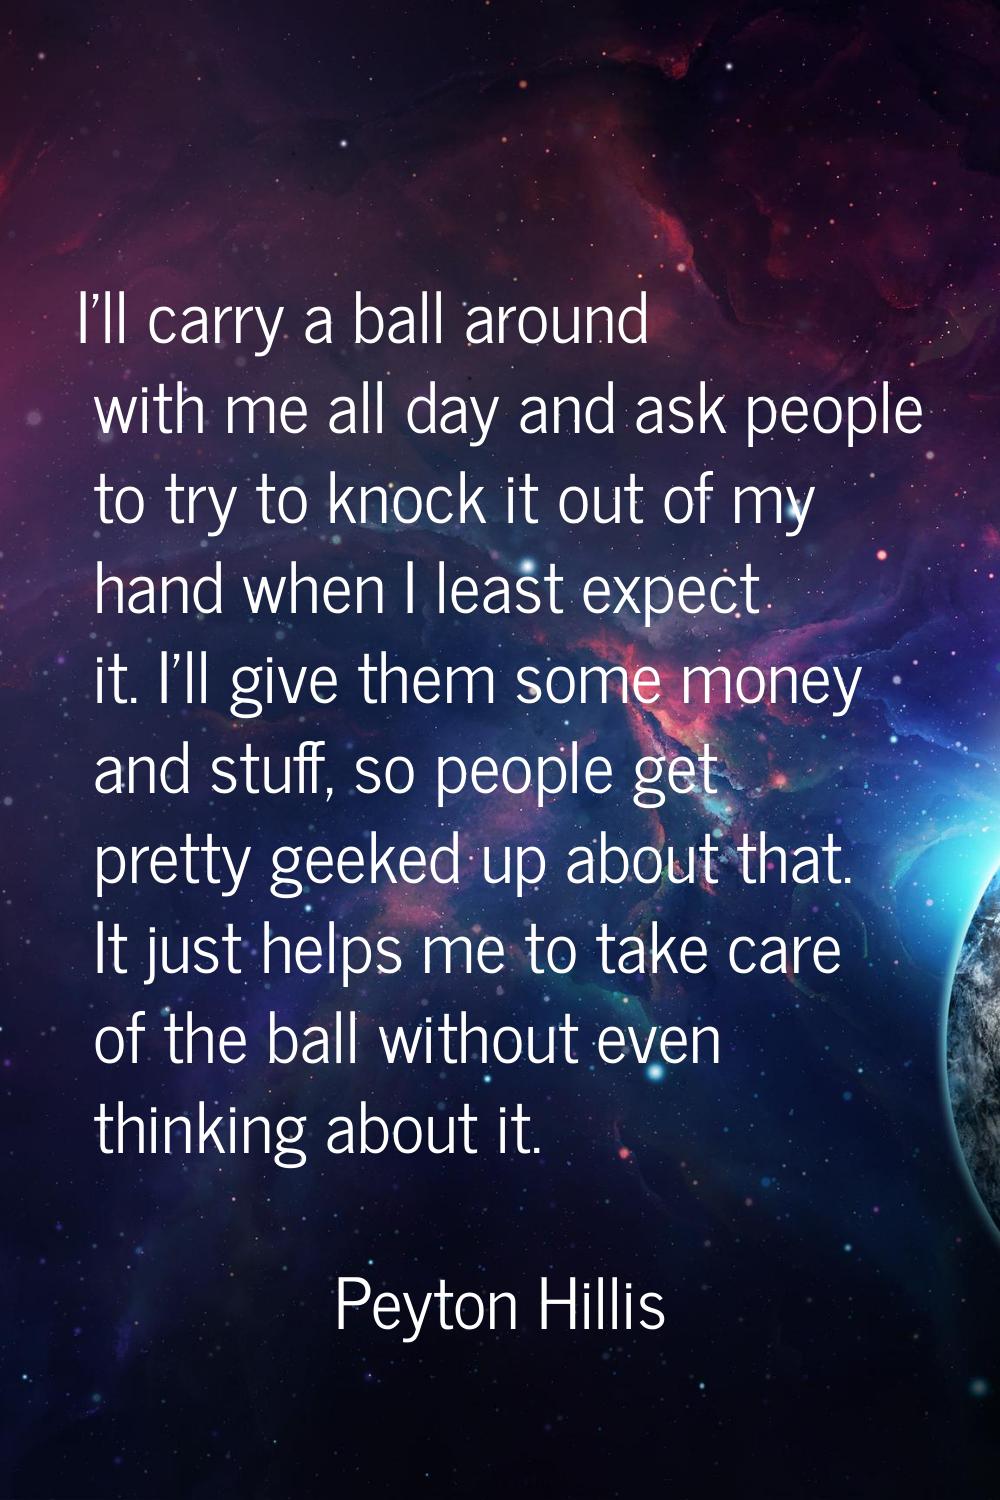 I'll carry a ball around with me all day and ask people to try to knock it out of my hand when I le